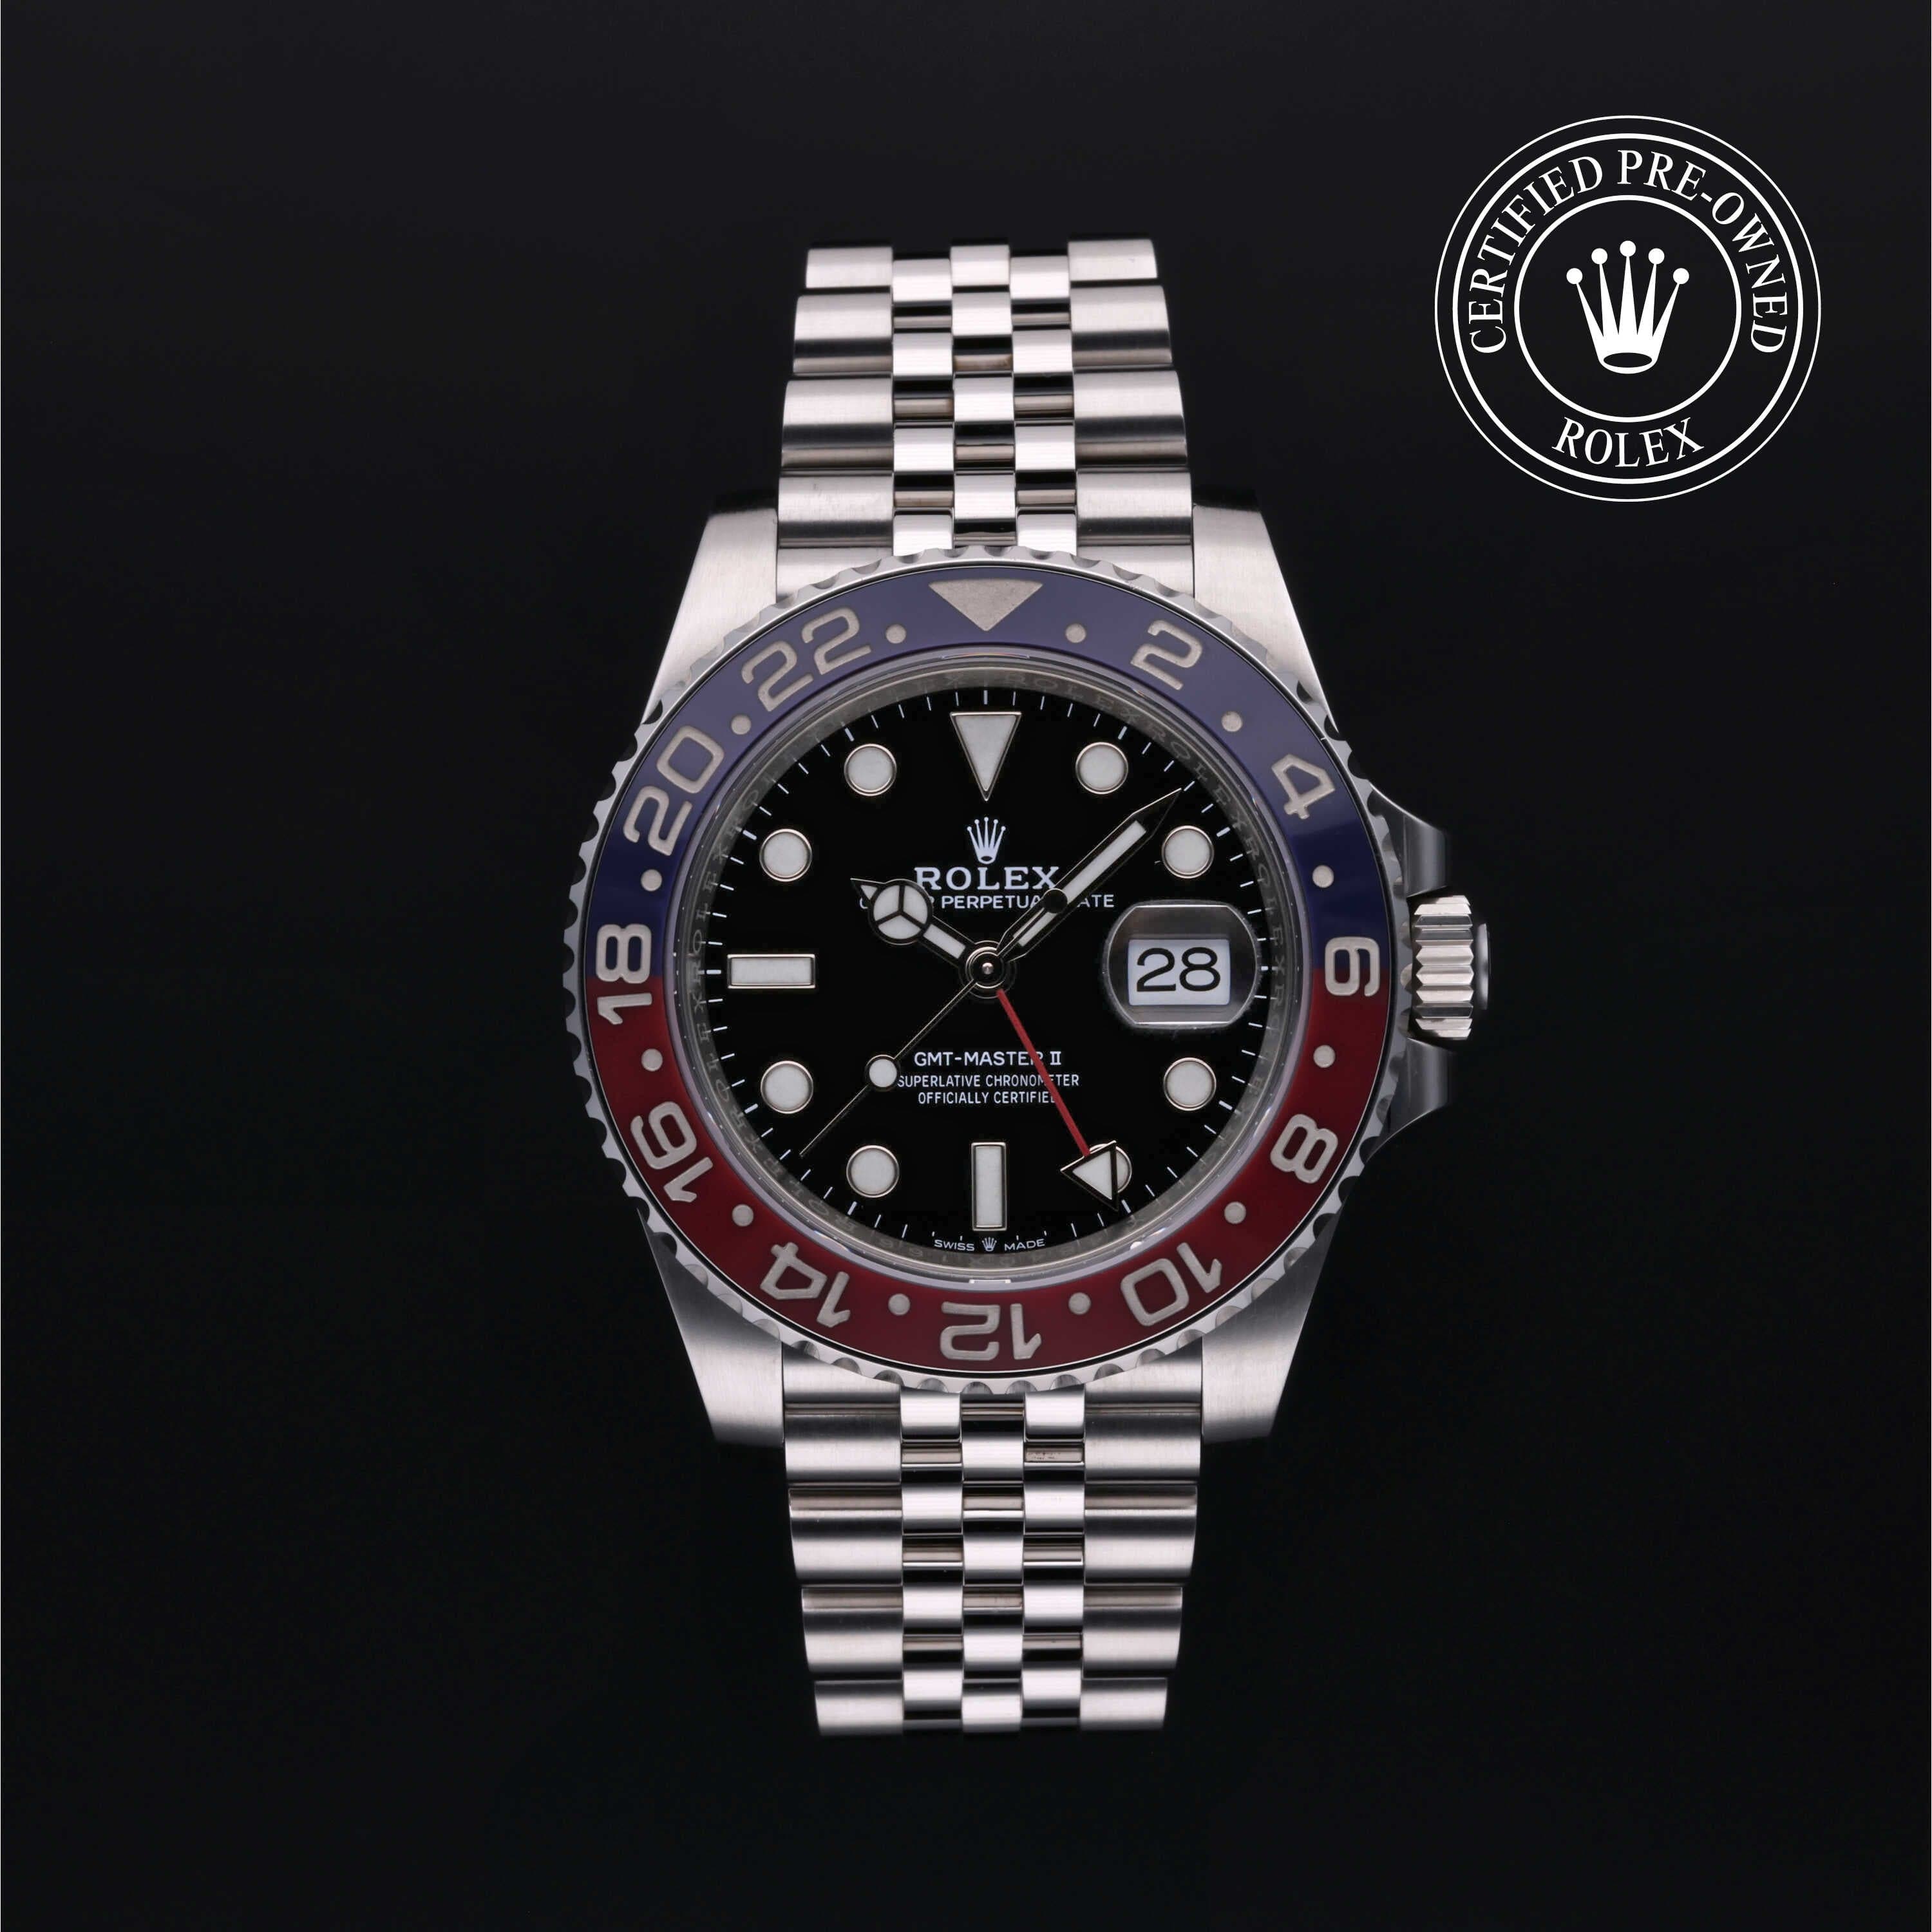 Rolex Certified Pre-Owned GMT Master II in Oyster, 40 mm, Stainless Steel 126710BLRO watch